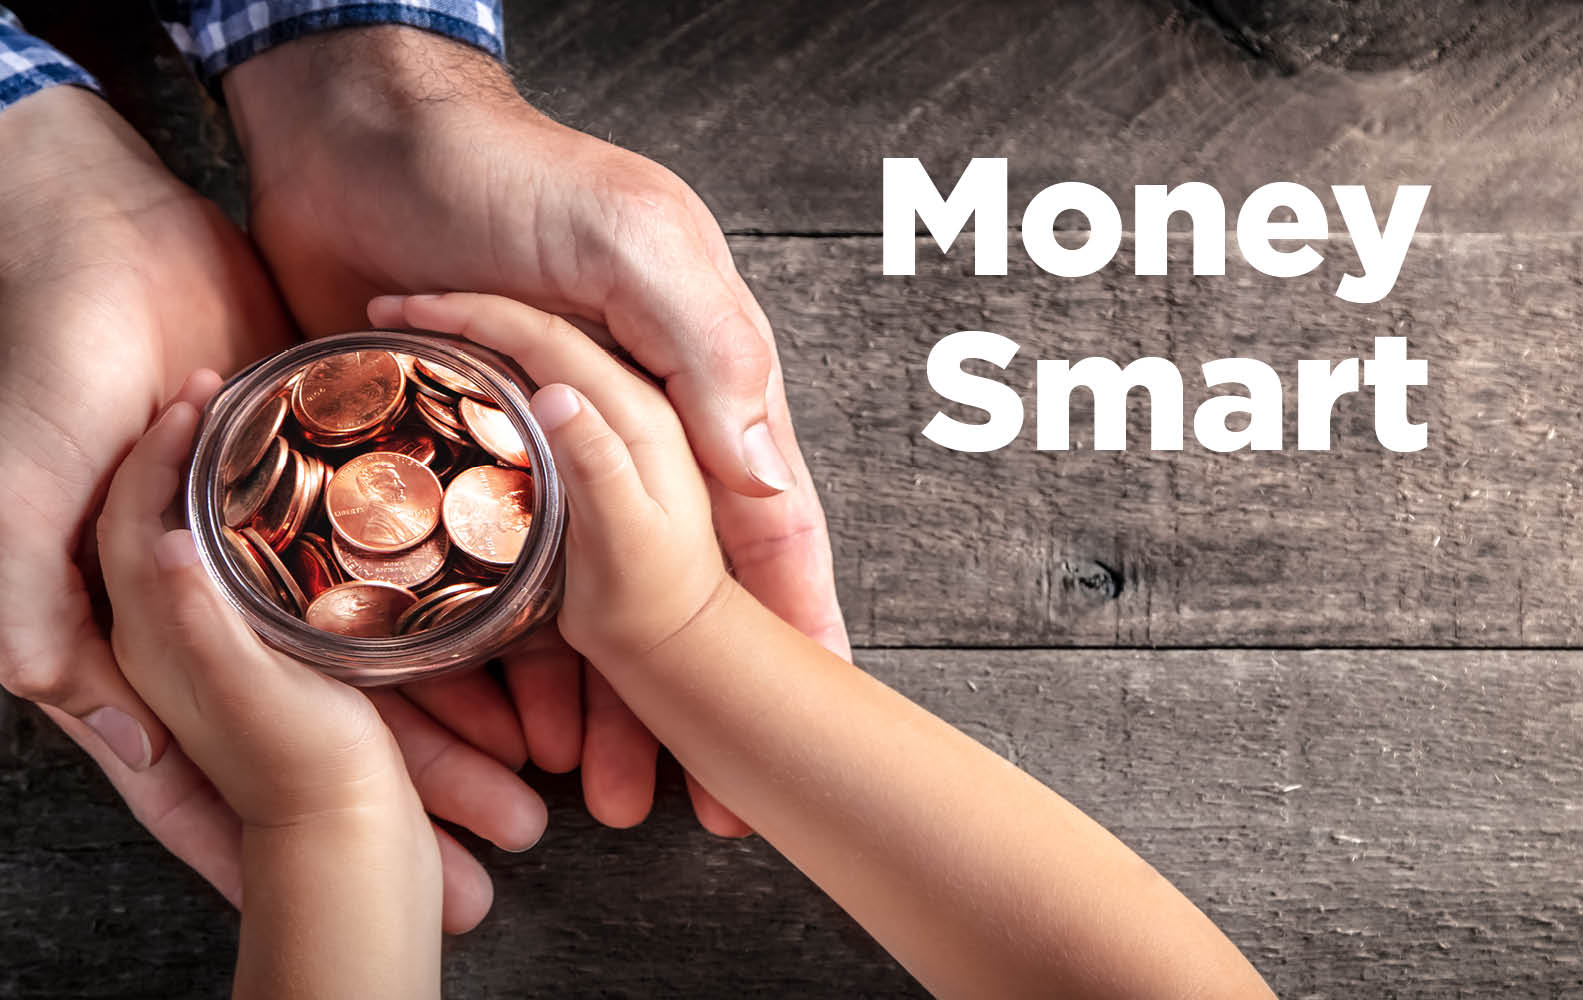 Adult and child hands on a money jar. "Money Smart"